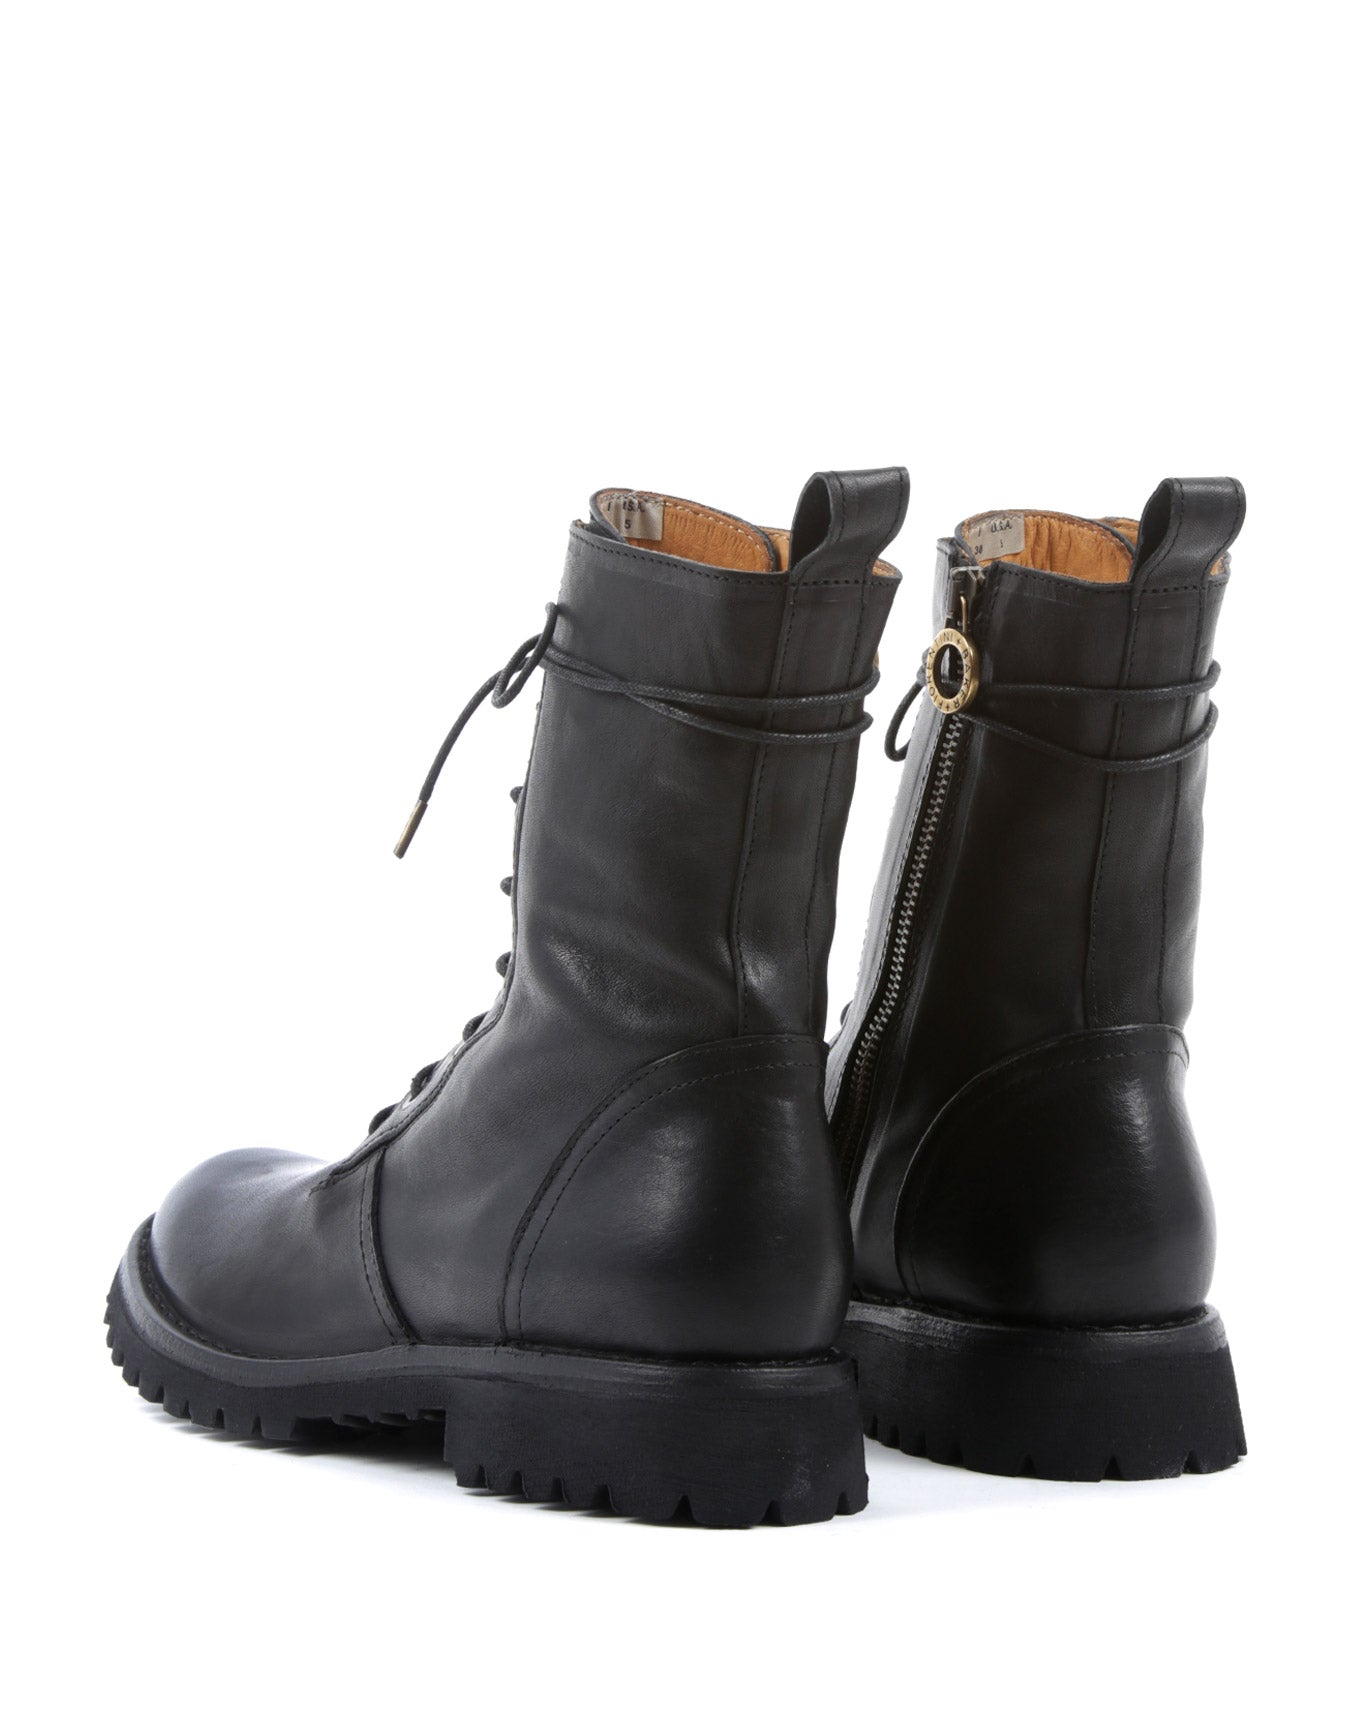 FIORENTINI + BAKER, ETERNITY MASSIVE M-EGOS, Lace up military style boots with robust sole. Handcrafted with natural leather by skilled artisans. Made in Italy. Made to last.